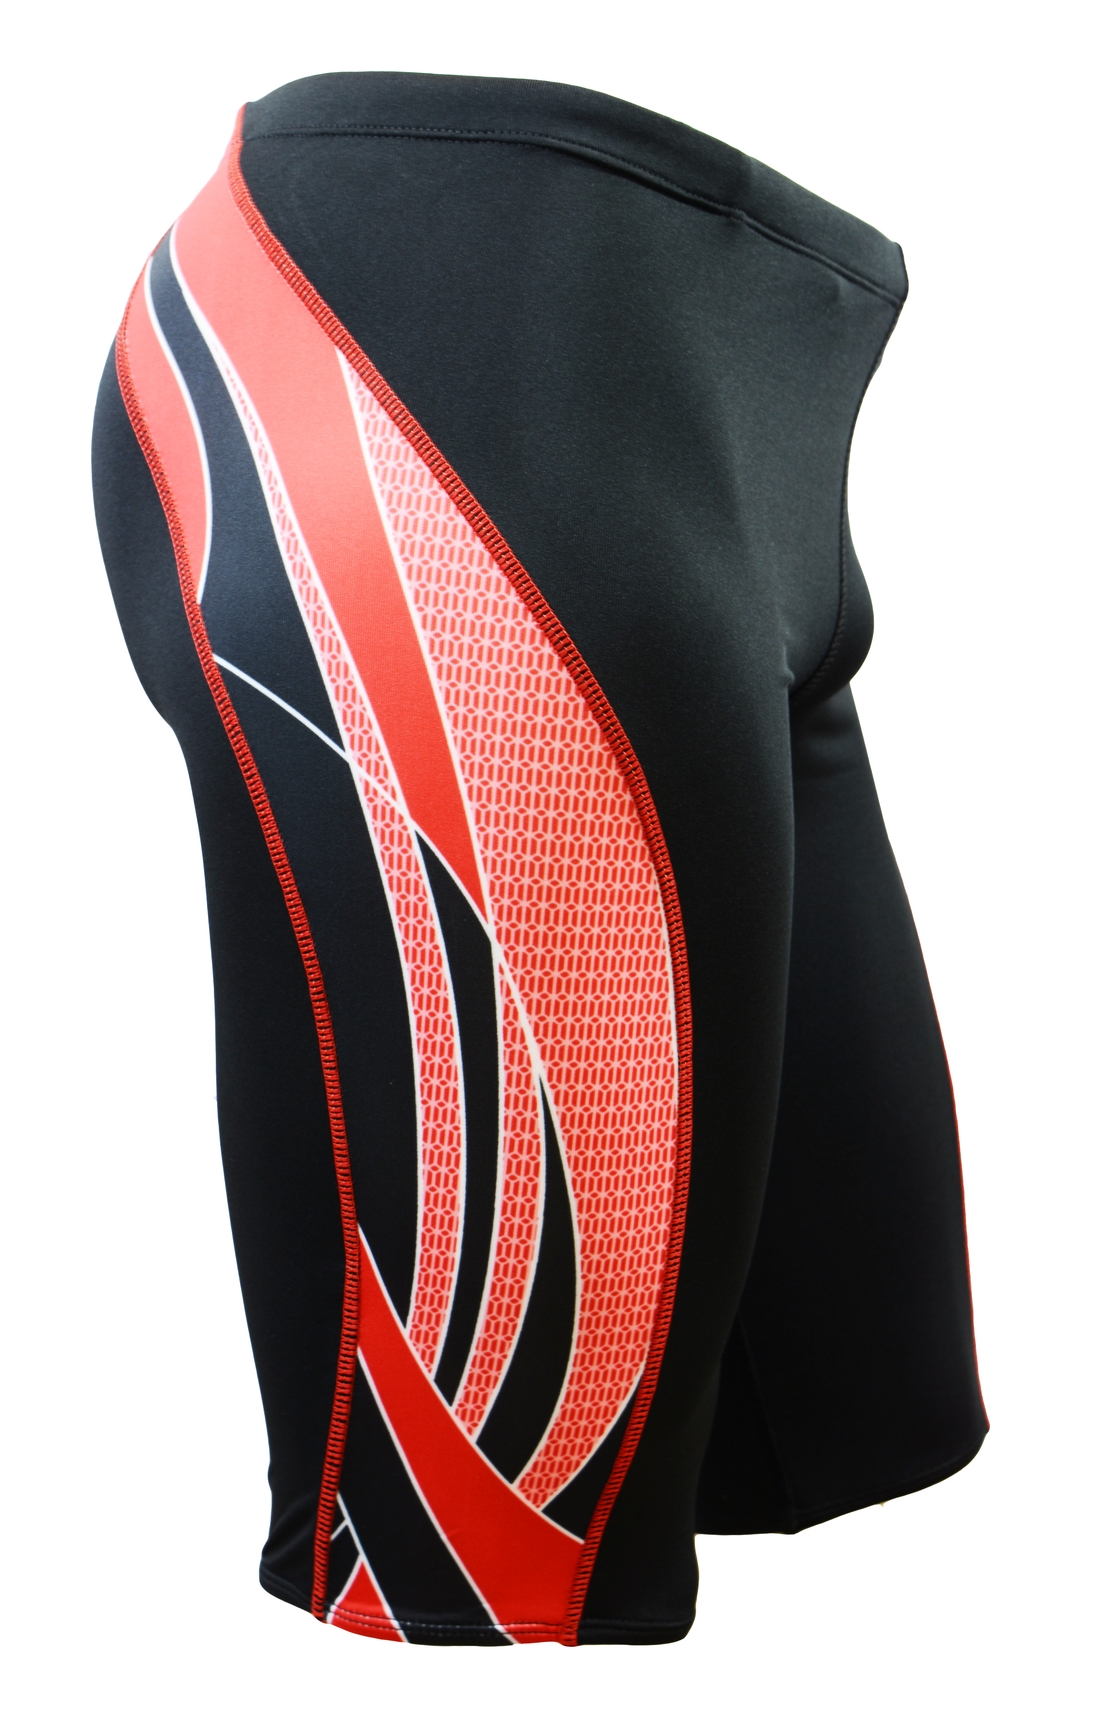 Adoretex Men's Side Wings Jammer Swimsuit (Youth)